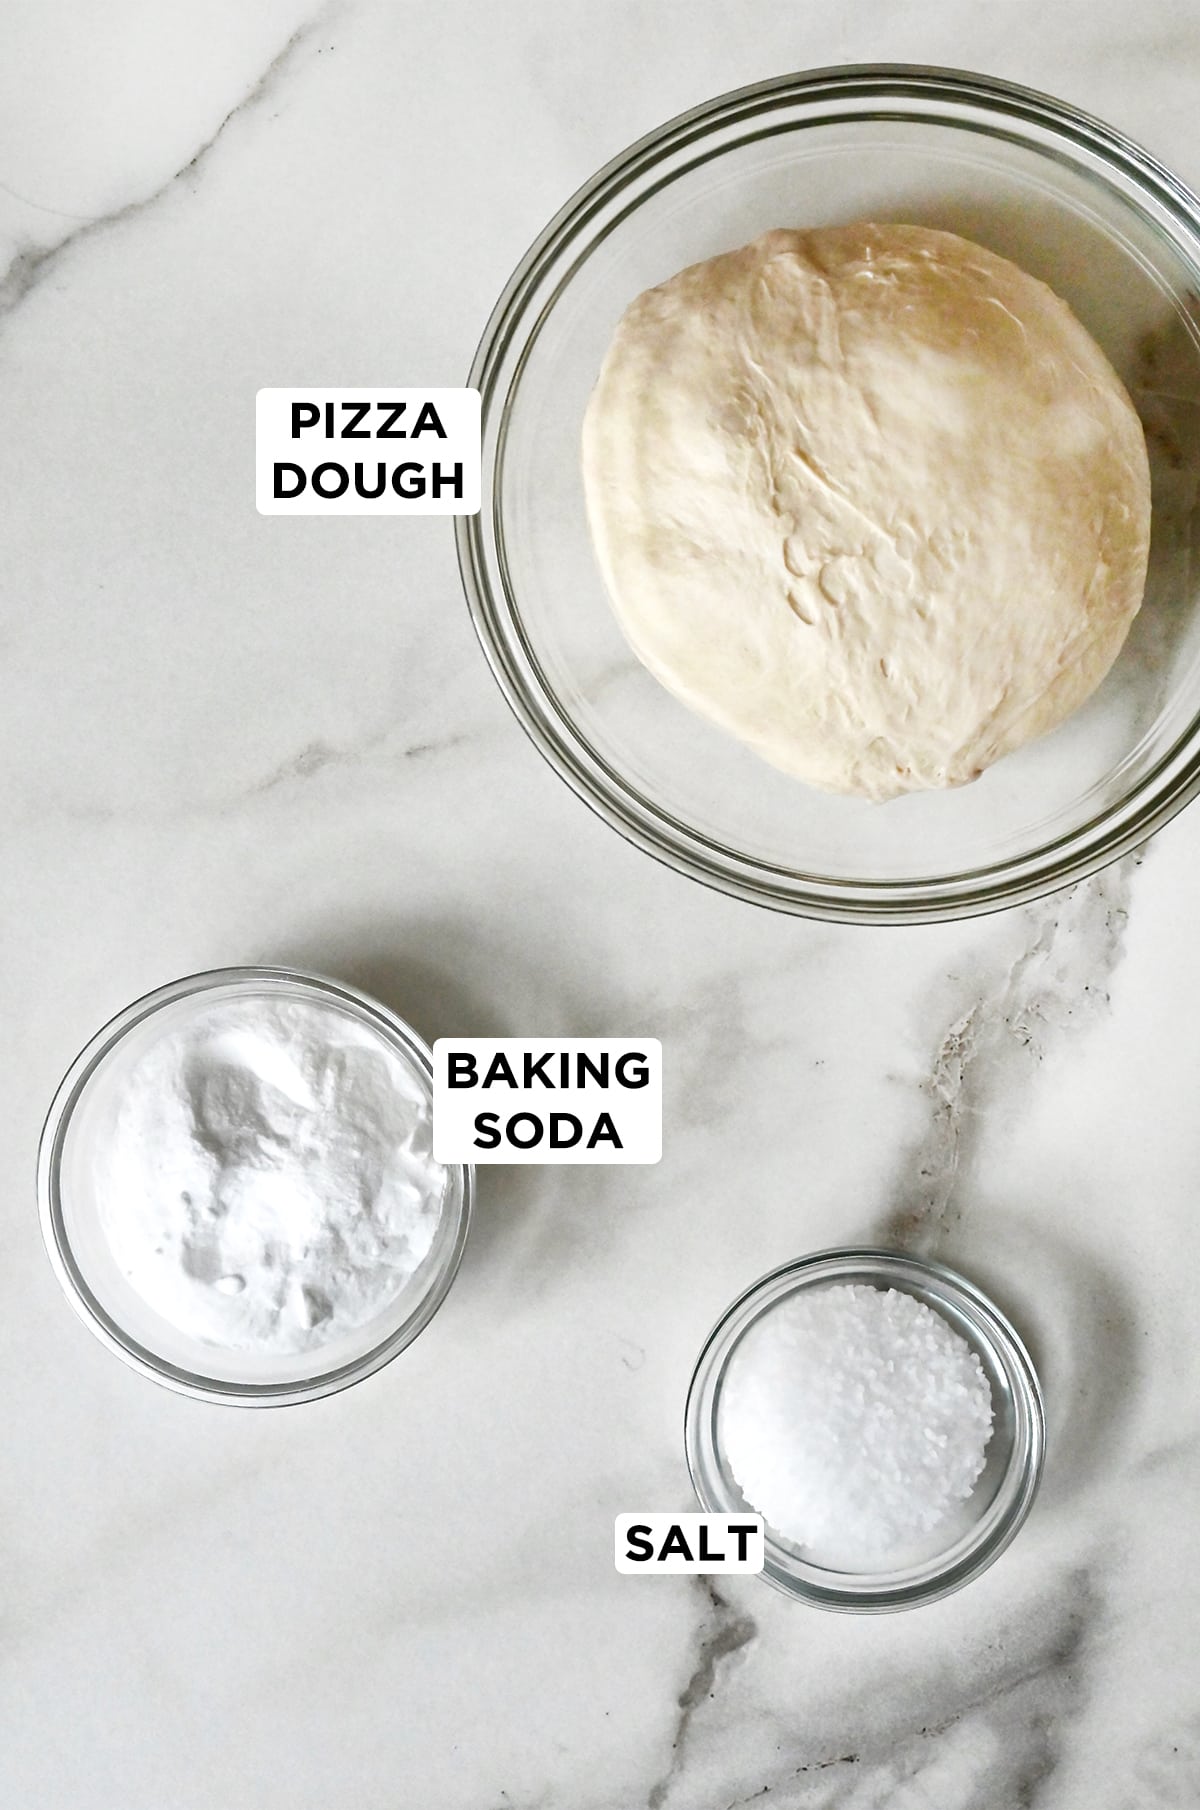 Three glass bowls containing pizza dough, baking soda and salt.